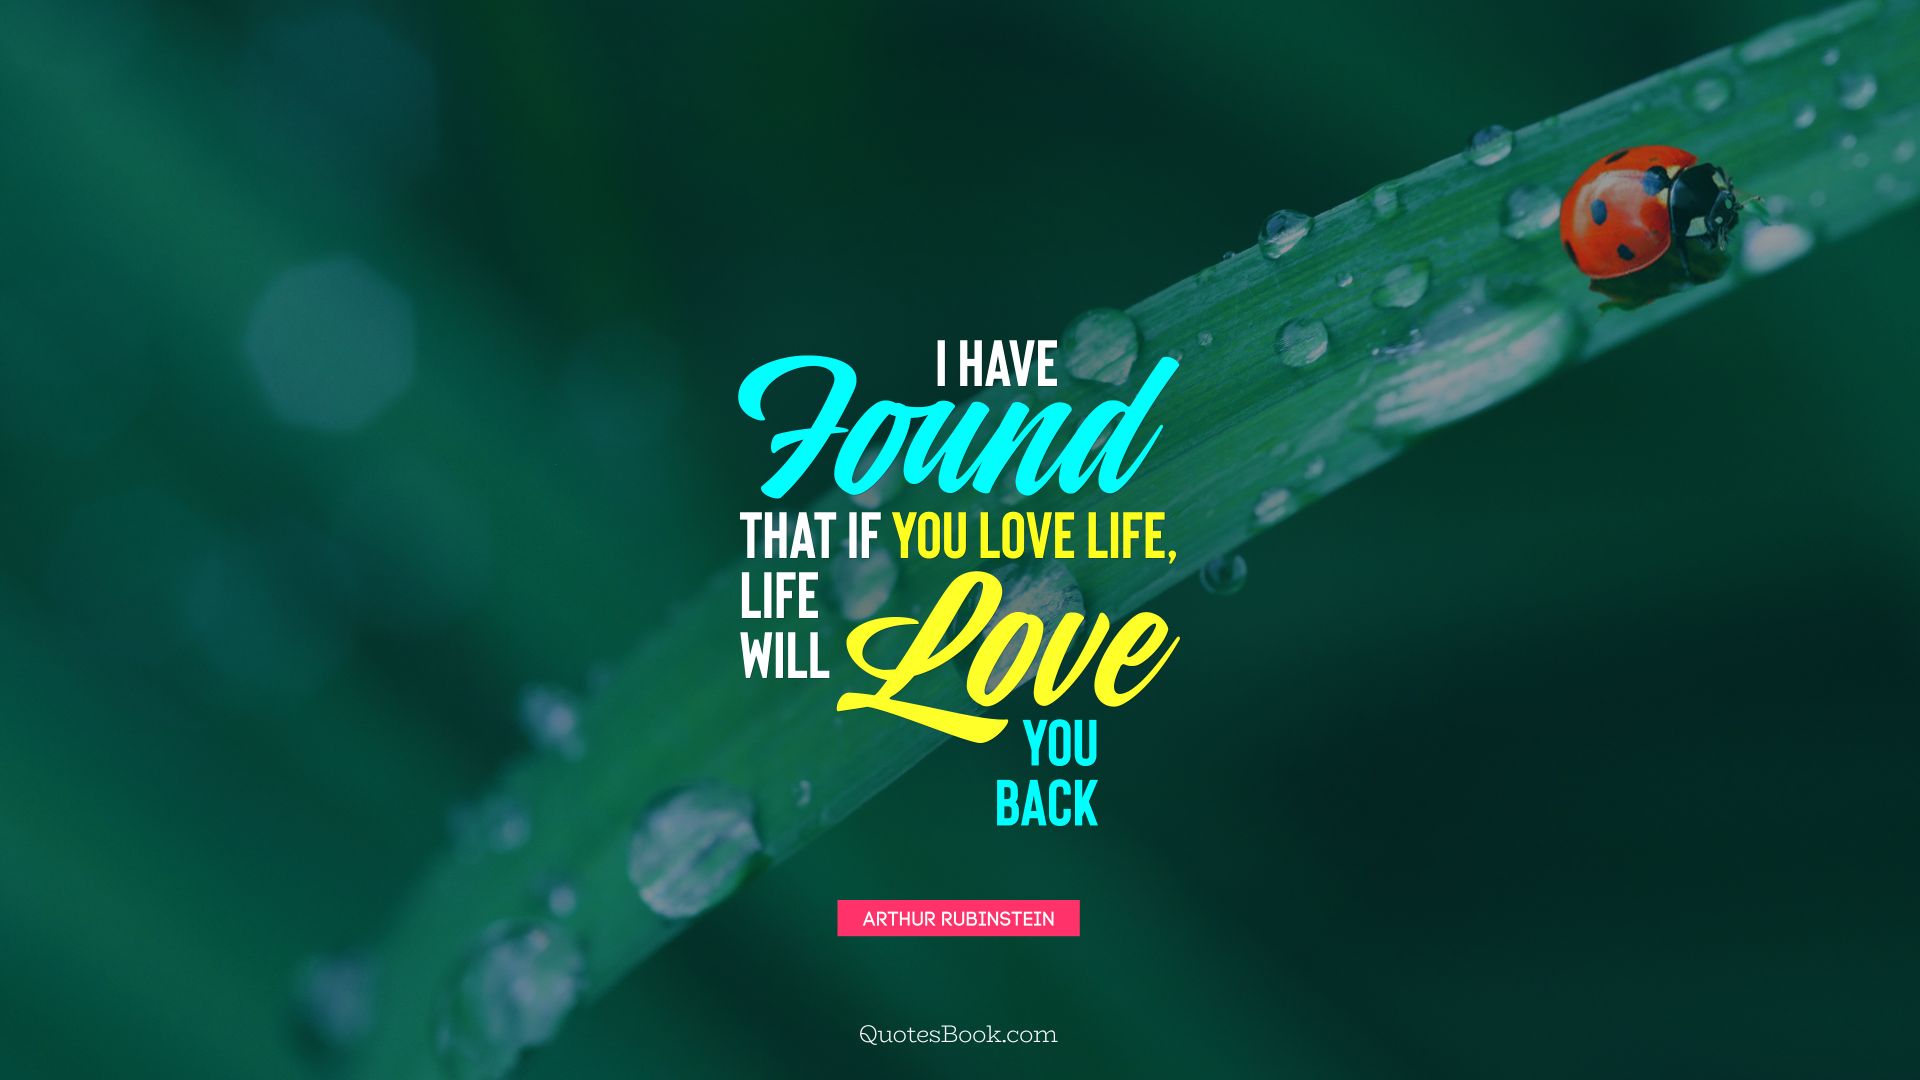 I have found that if you love life, life will love you back. - Quote by Arthur Rubinstein